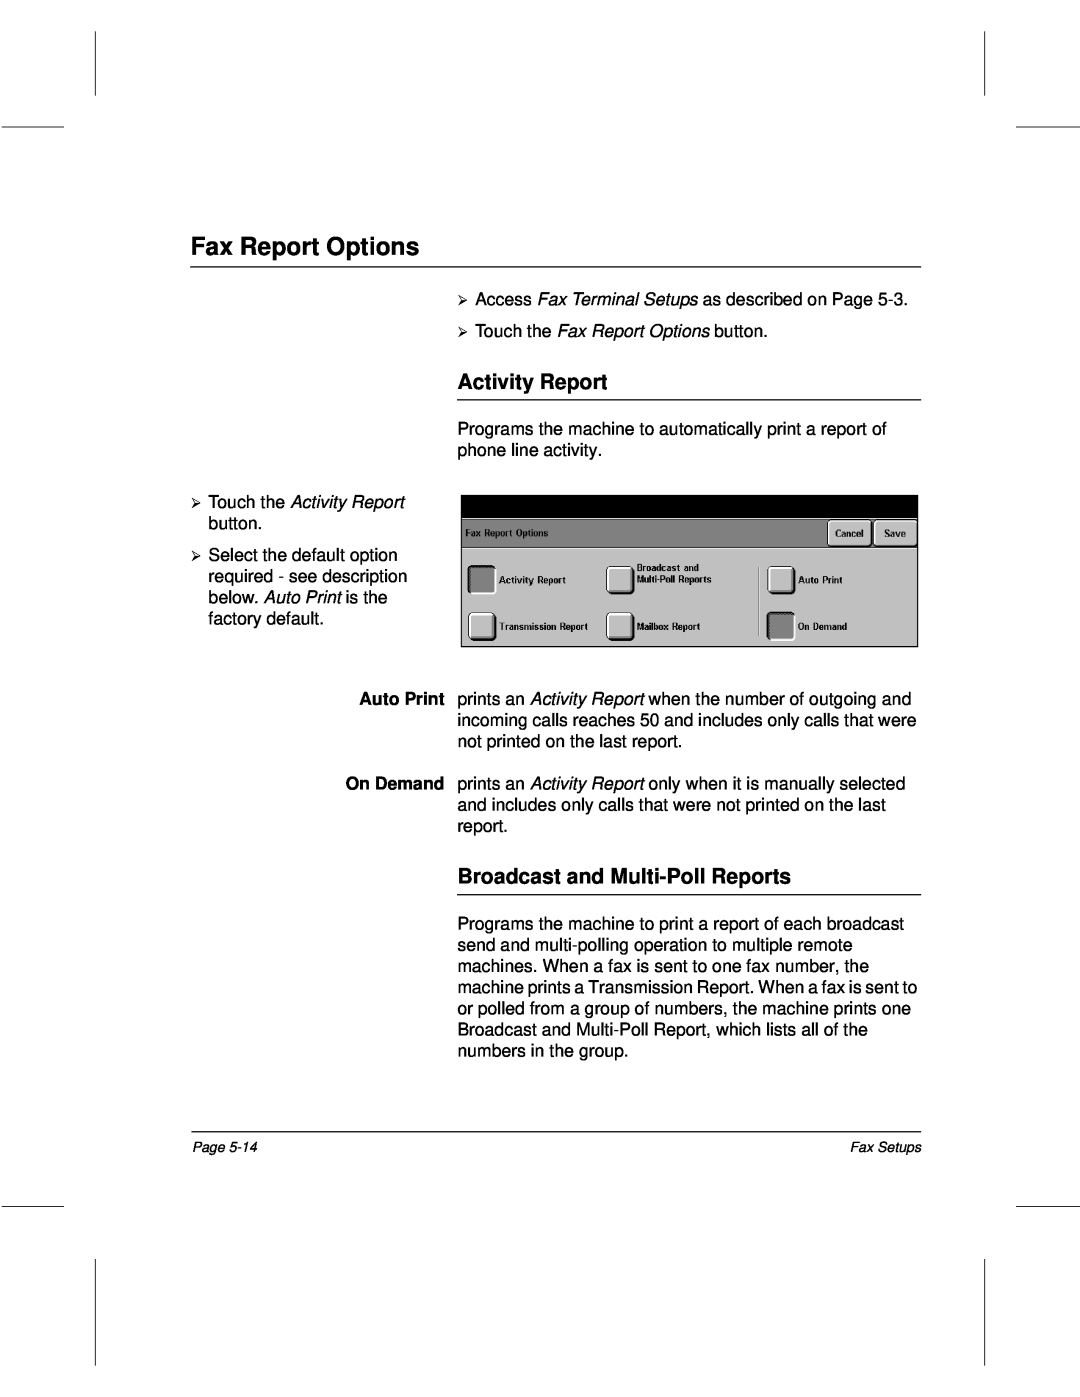 Xerox 340, 332, 220, 230 setup guide Fax Report Options, Broadcast and Multi-Poll Reports, Touch the Activity Report 